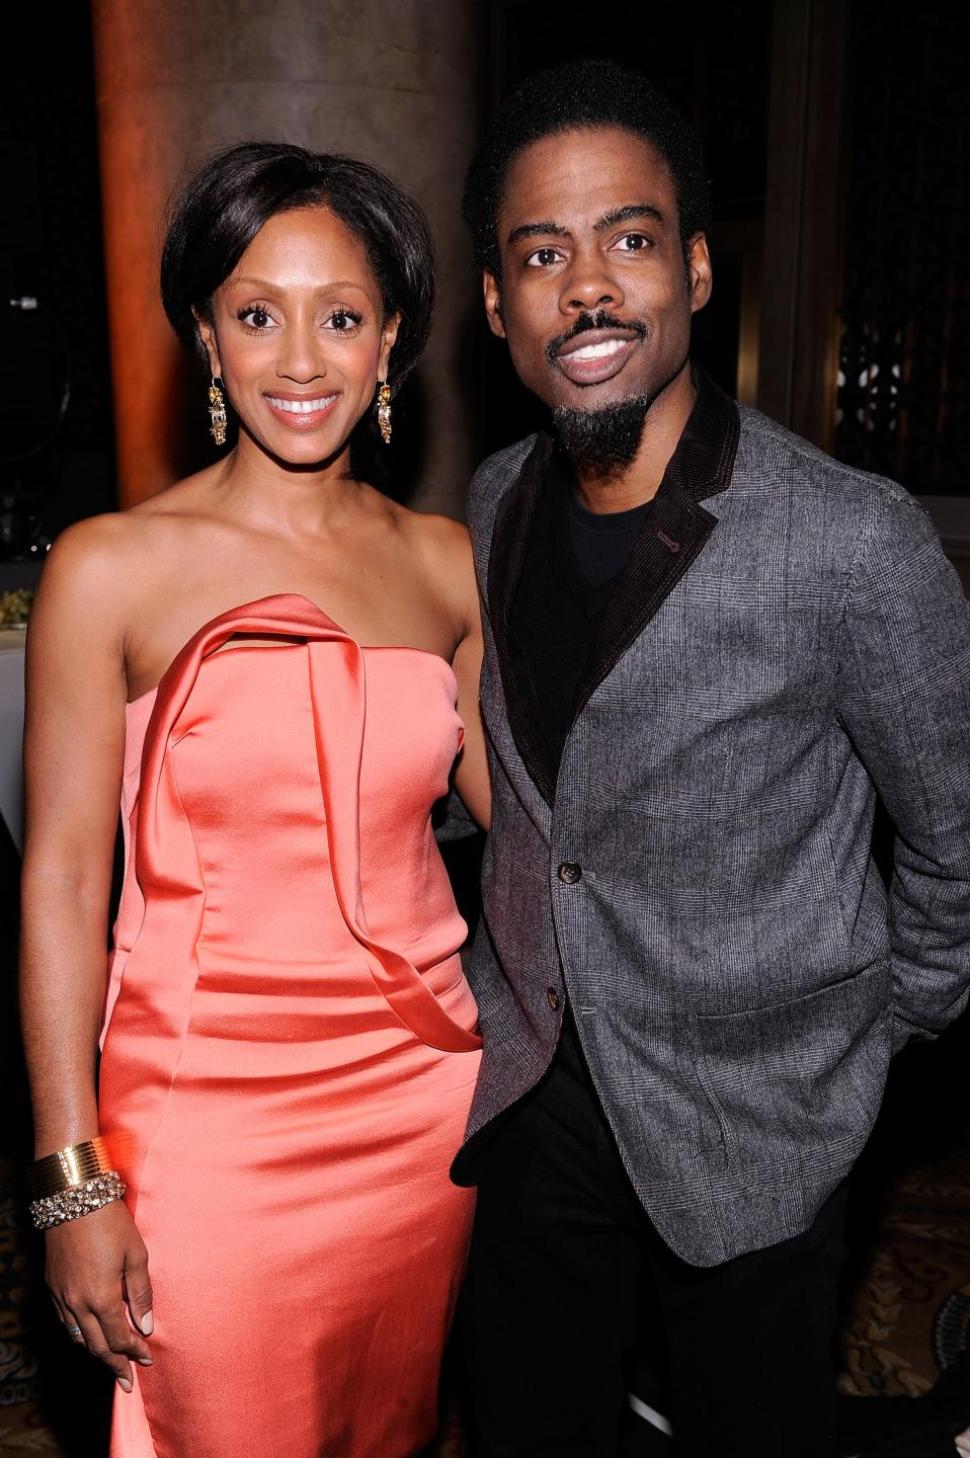 Malaak Compton-Rock and Chris Rock are breaking up after a 19-year-marriage.